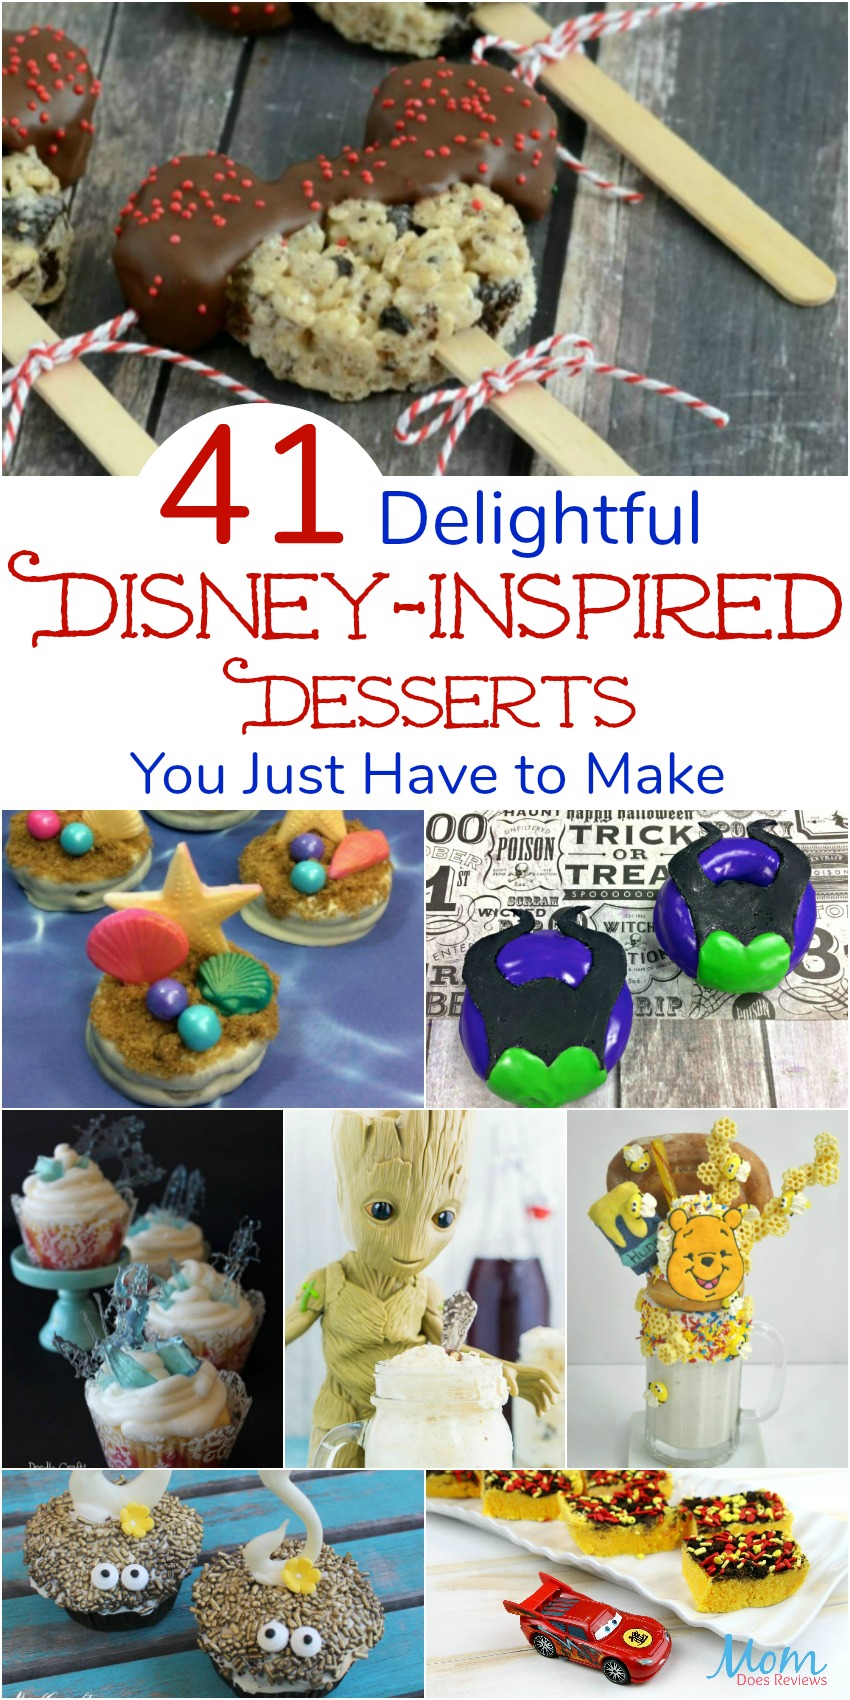 41 Delightful Disney-Inspired Desserts You Just Have to Make